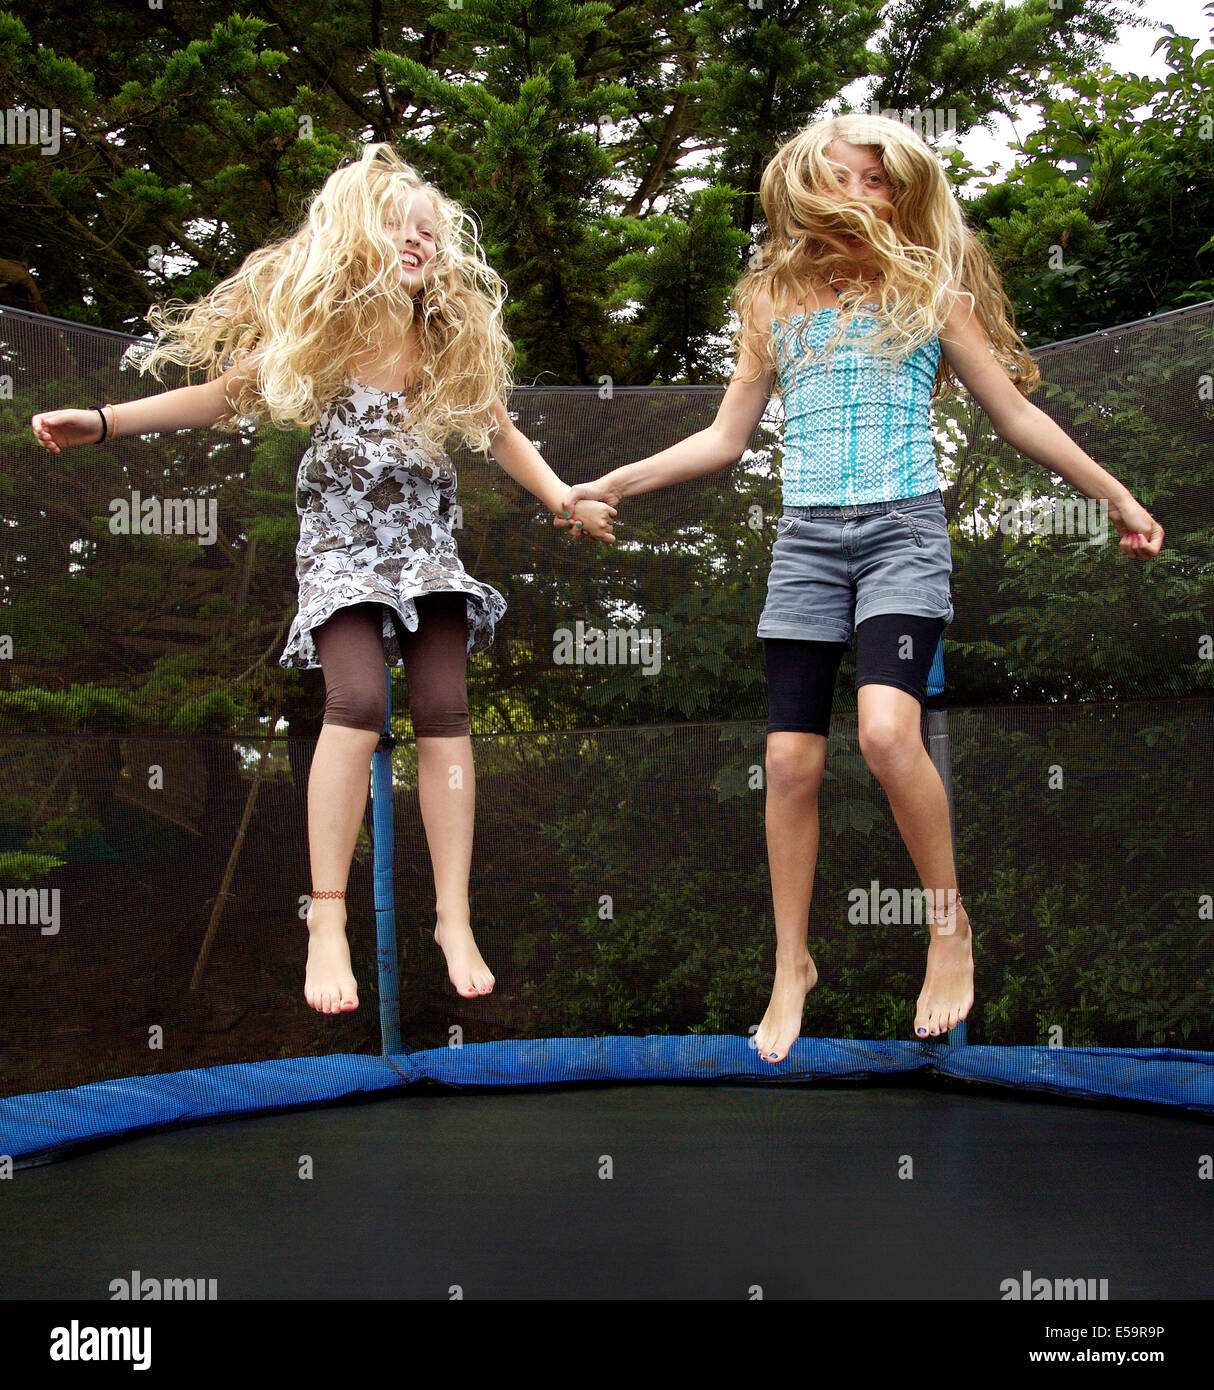 Girls jumping on trampoline outdoors Stock Photo